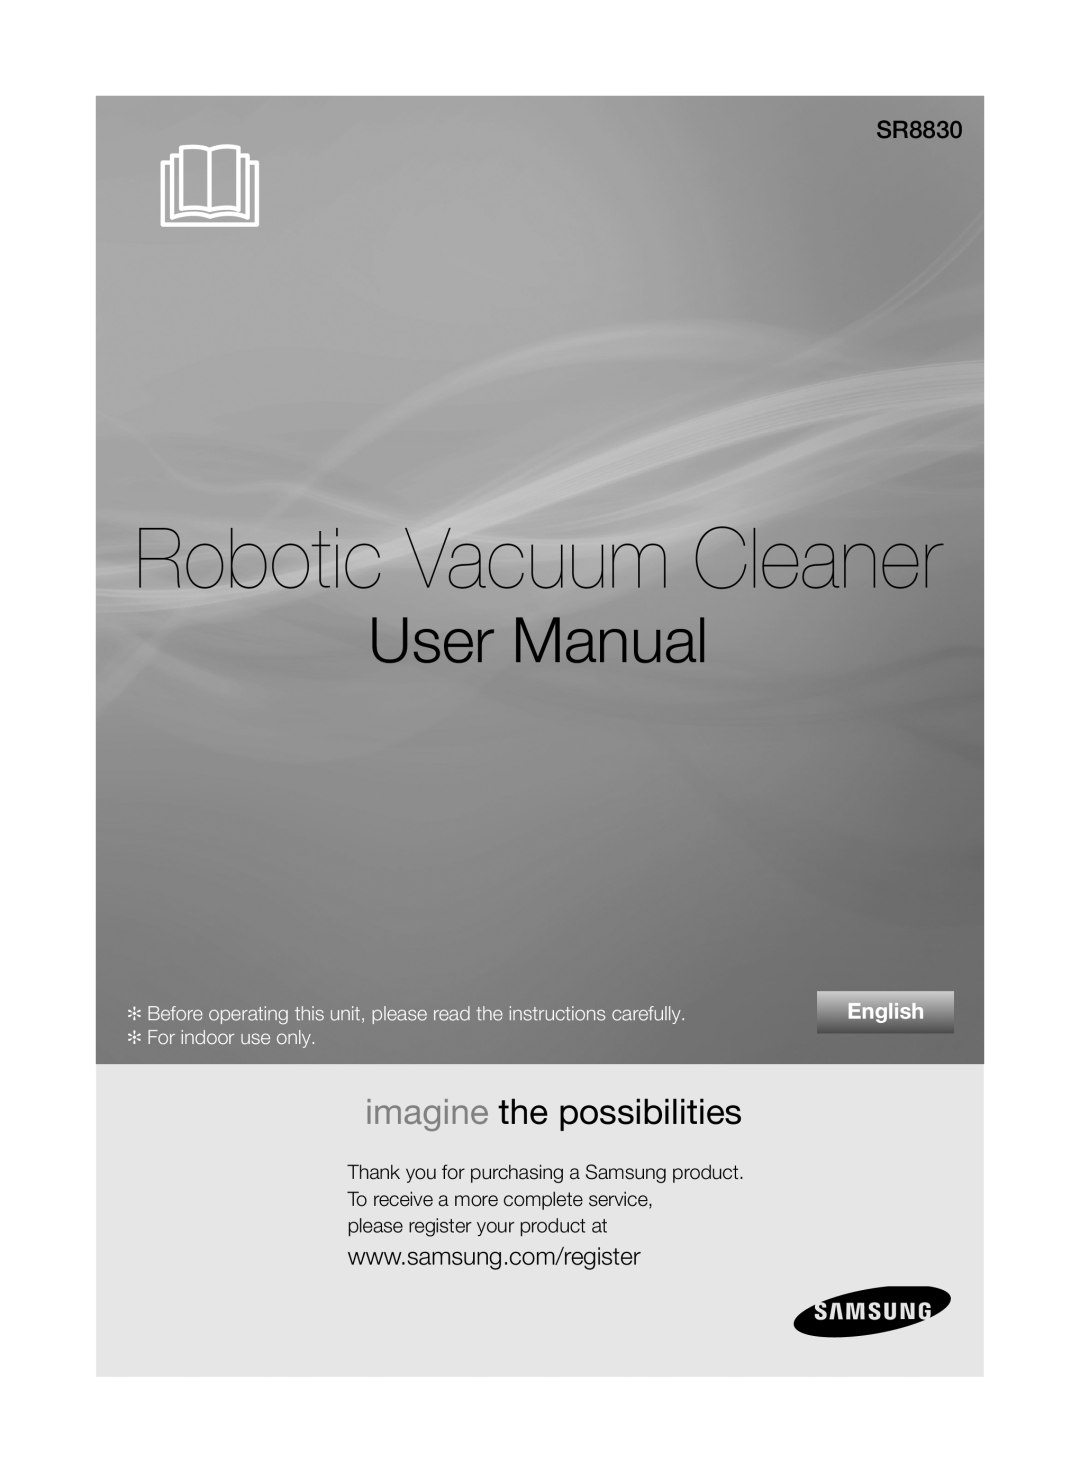 Samsung SR8830 user manual User Manual, imagine the possibilities, English, Robotic Vacuum Cleaner, For indoor use only 